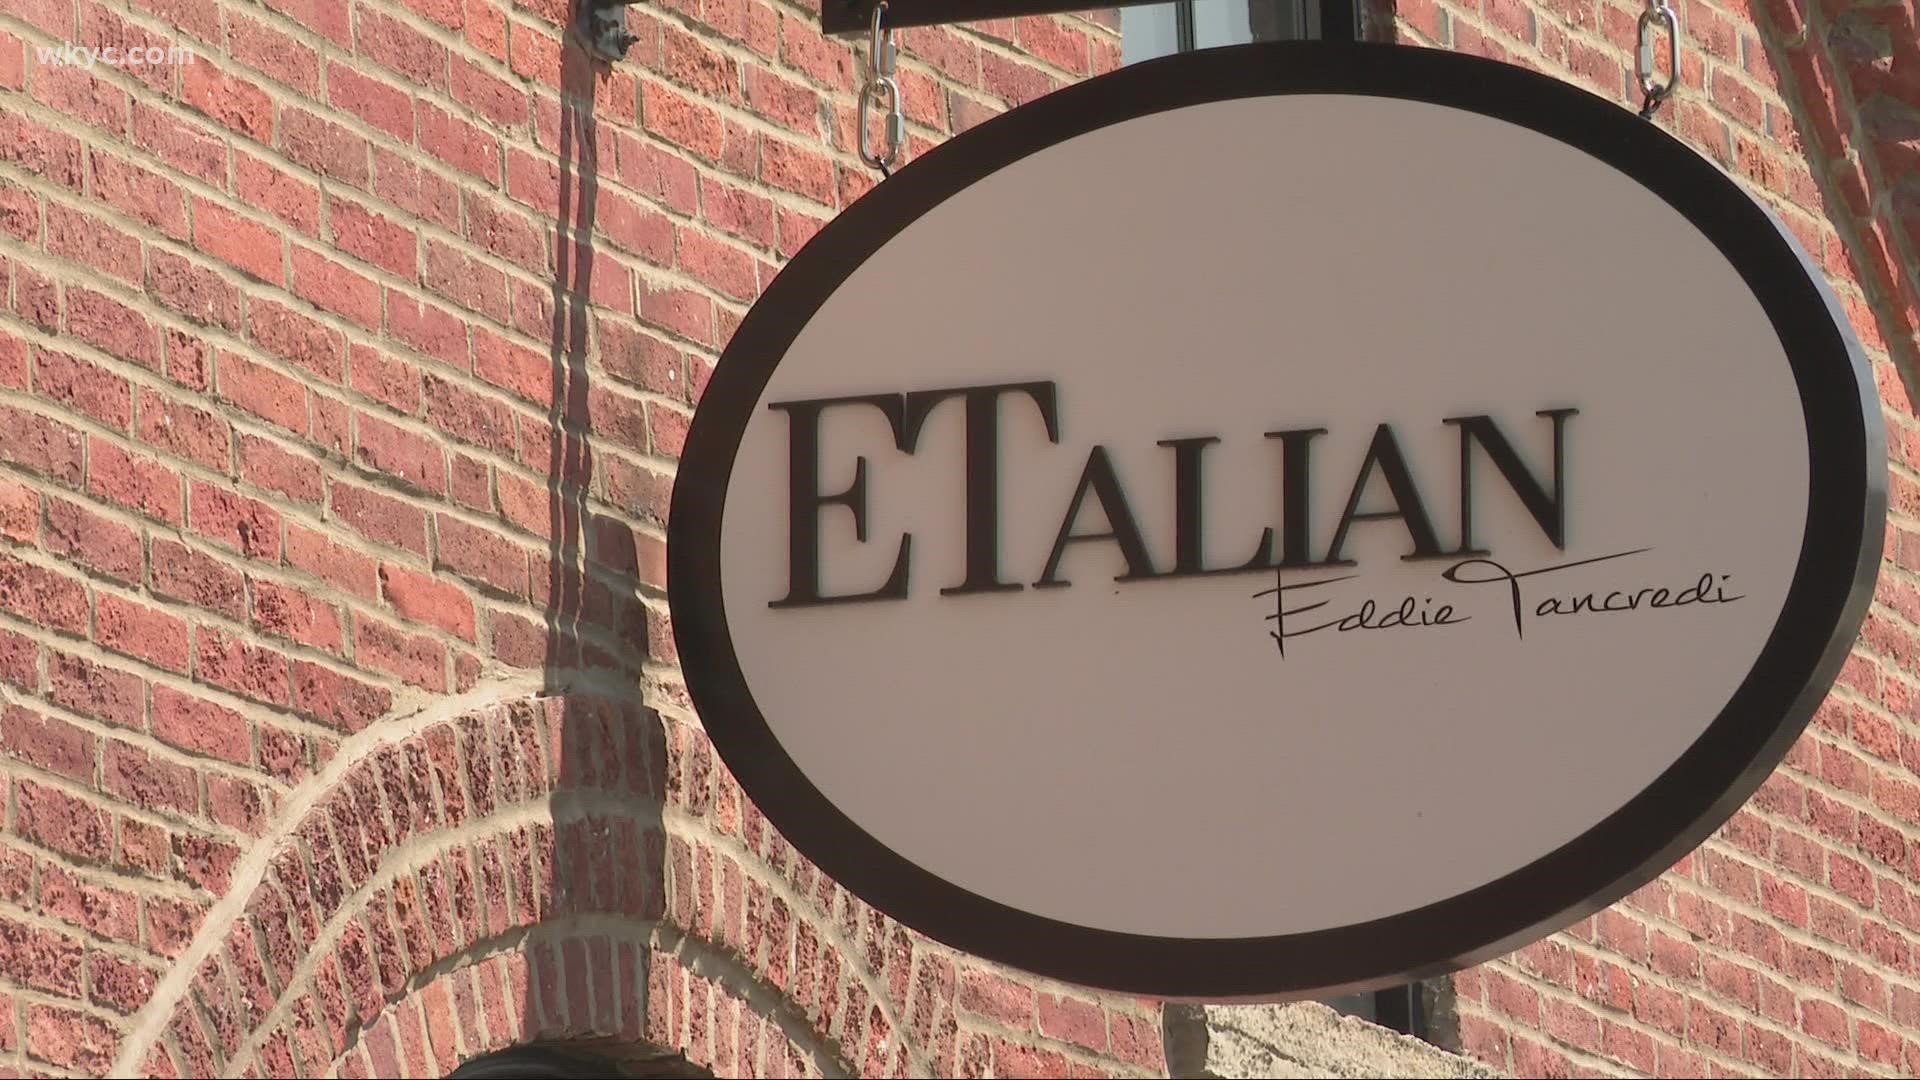 Eddie Tancredi previously owned Distill Table in Lakewood, but closed it due to the pandemic. Doug checks out his new restaurant in Chagrin Falls.